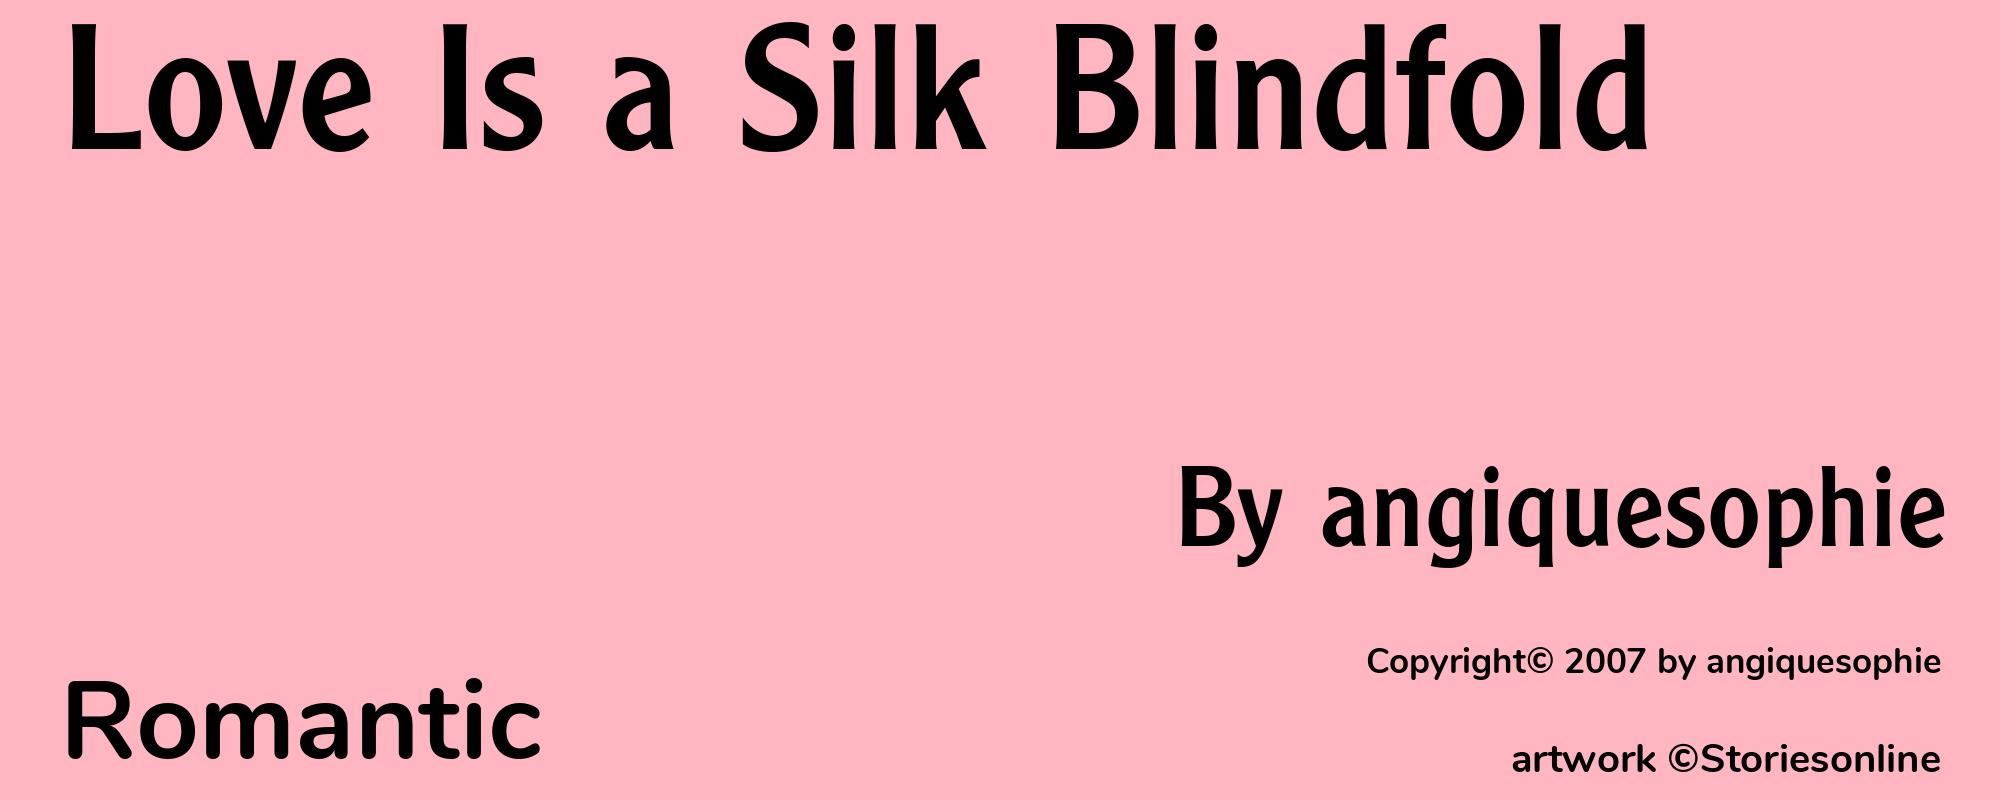 Love Is a Silk Blindfold - Cover